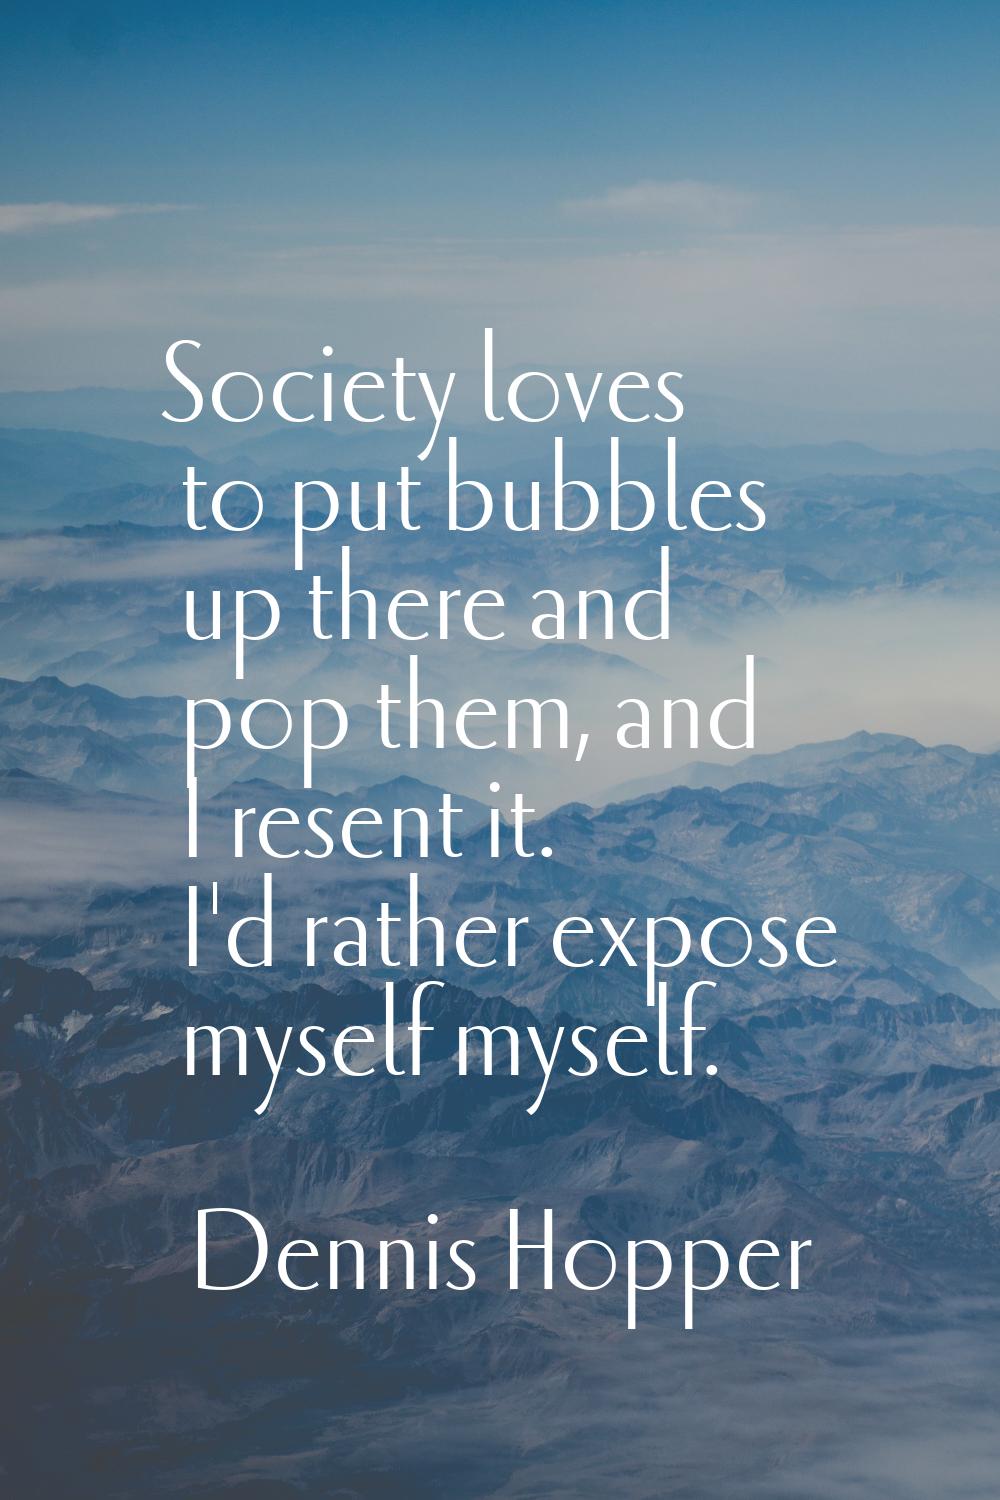 Society loves to put bubbles up there and pop them, and I resent it. I'd rather expose myself mysel